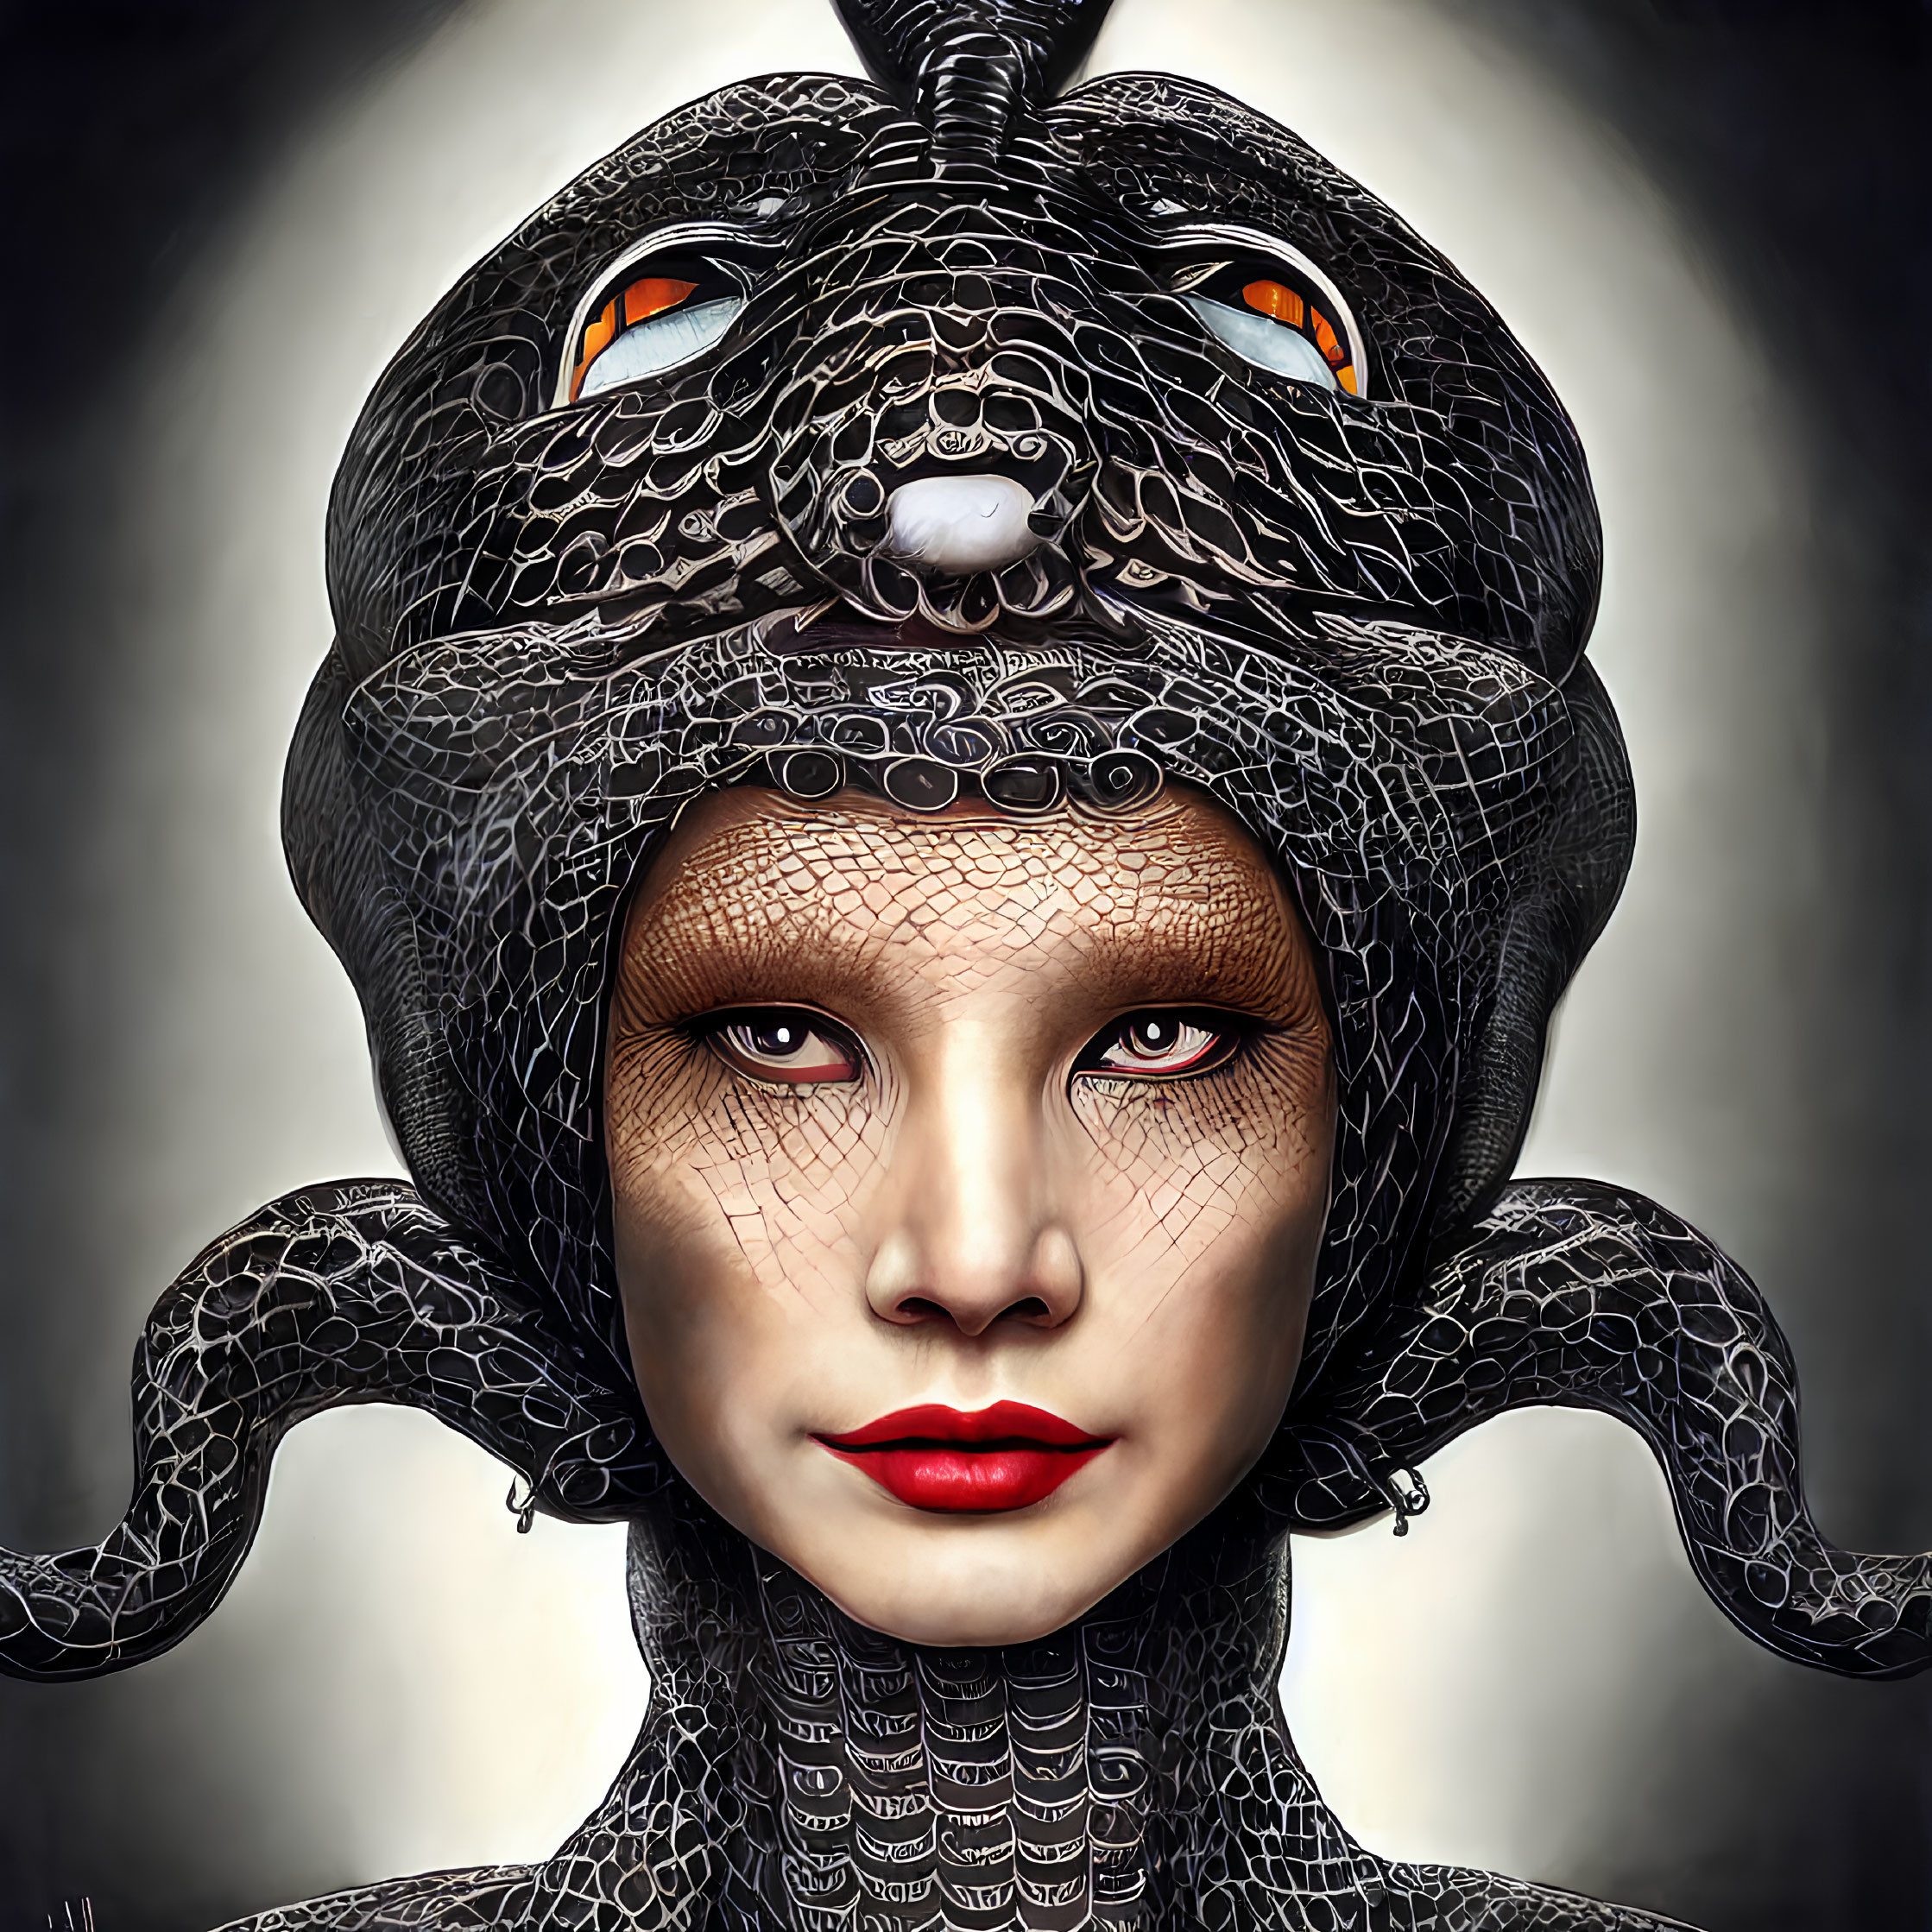 Person with stoic expression wearing coiled snake headdress with orange eyes